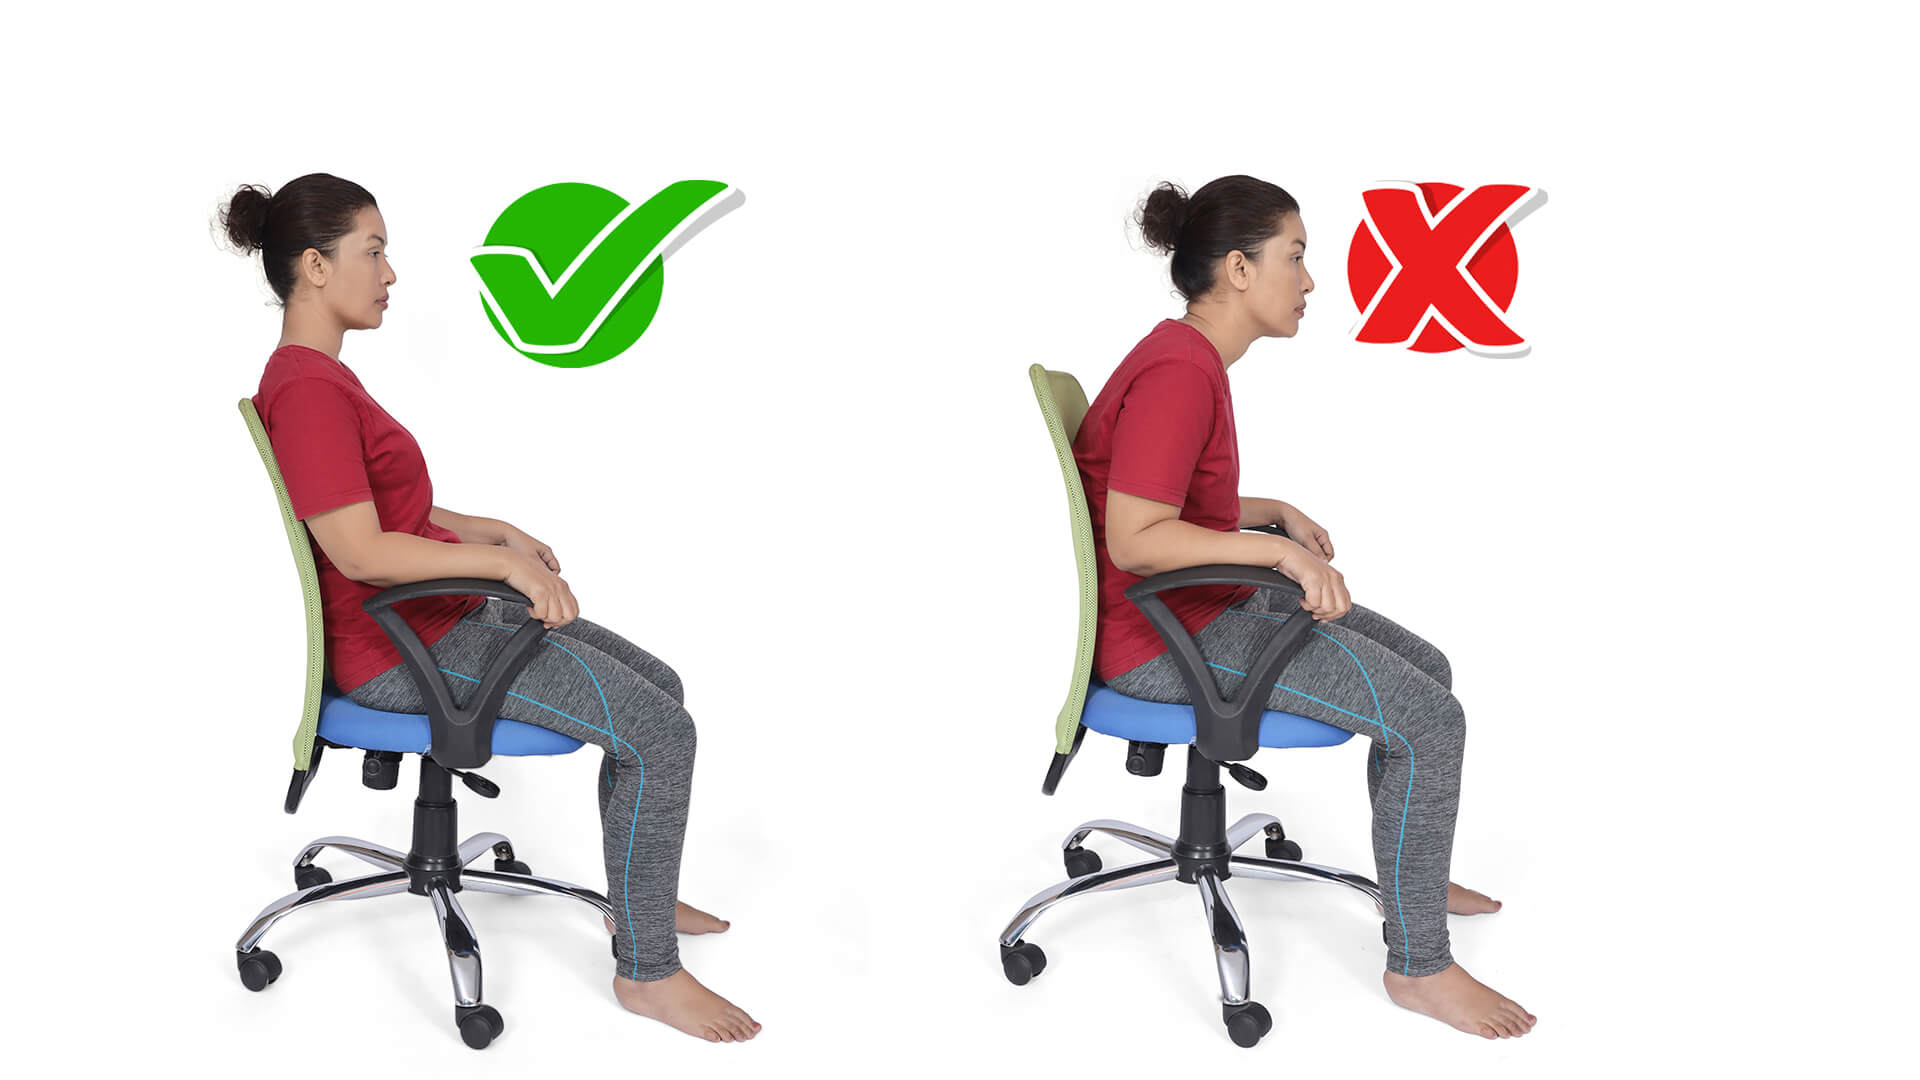 Right and wrong sitting posture